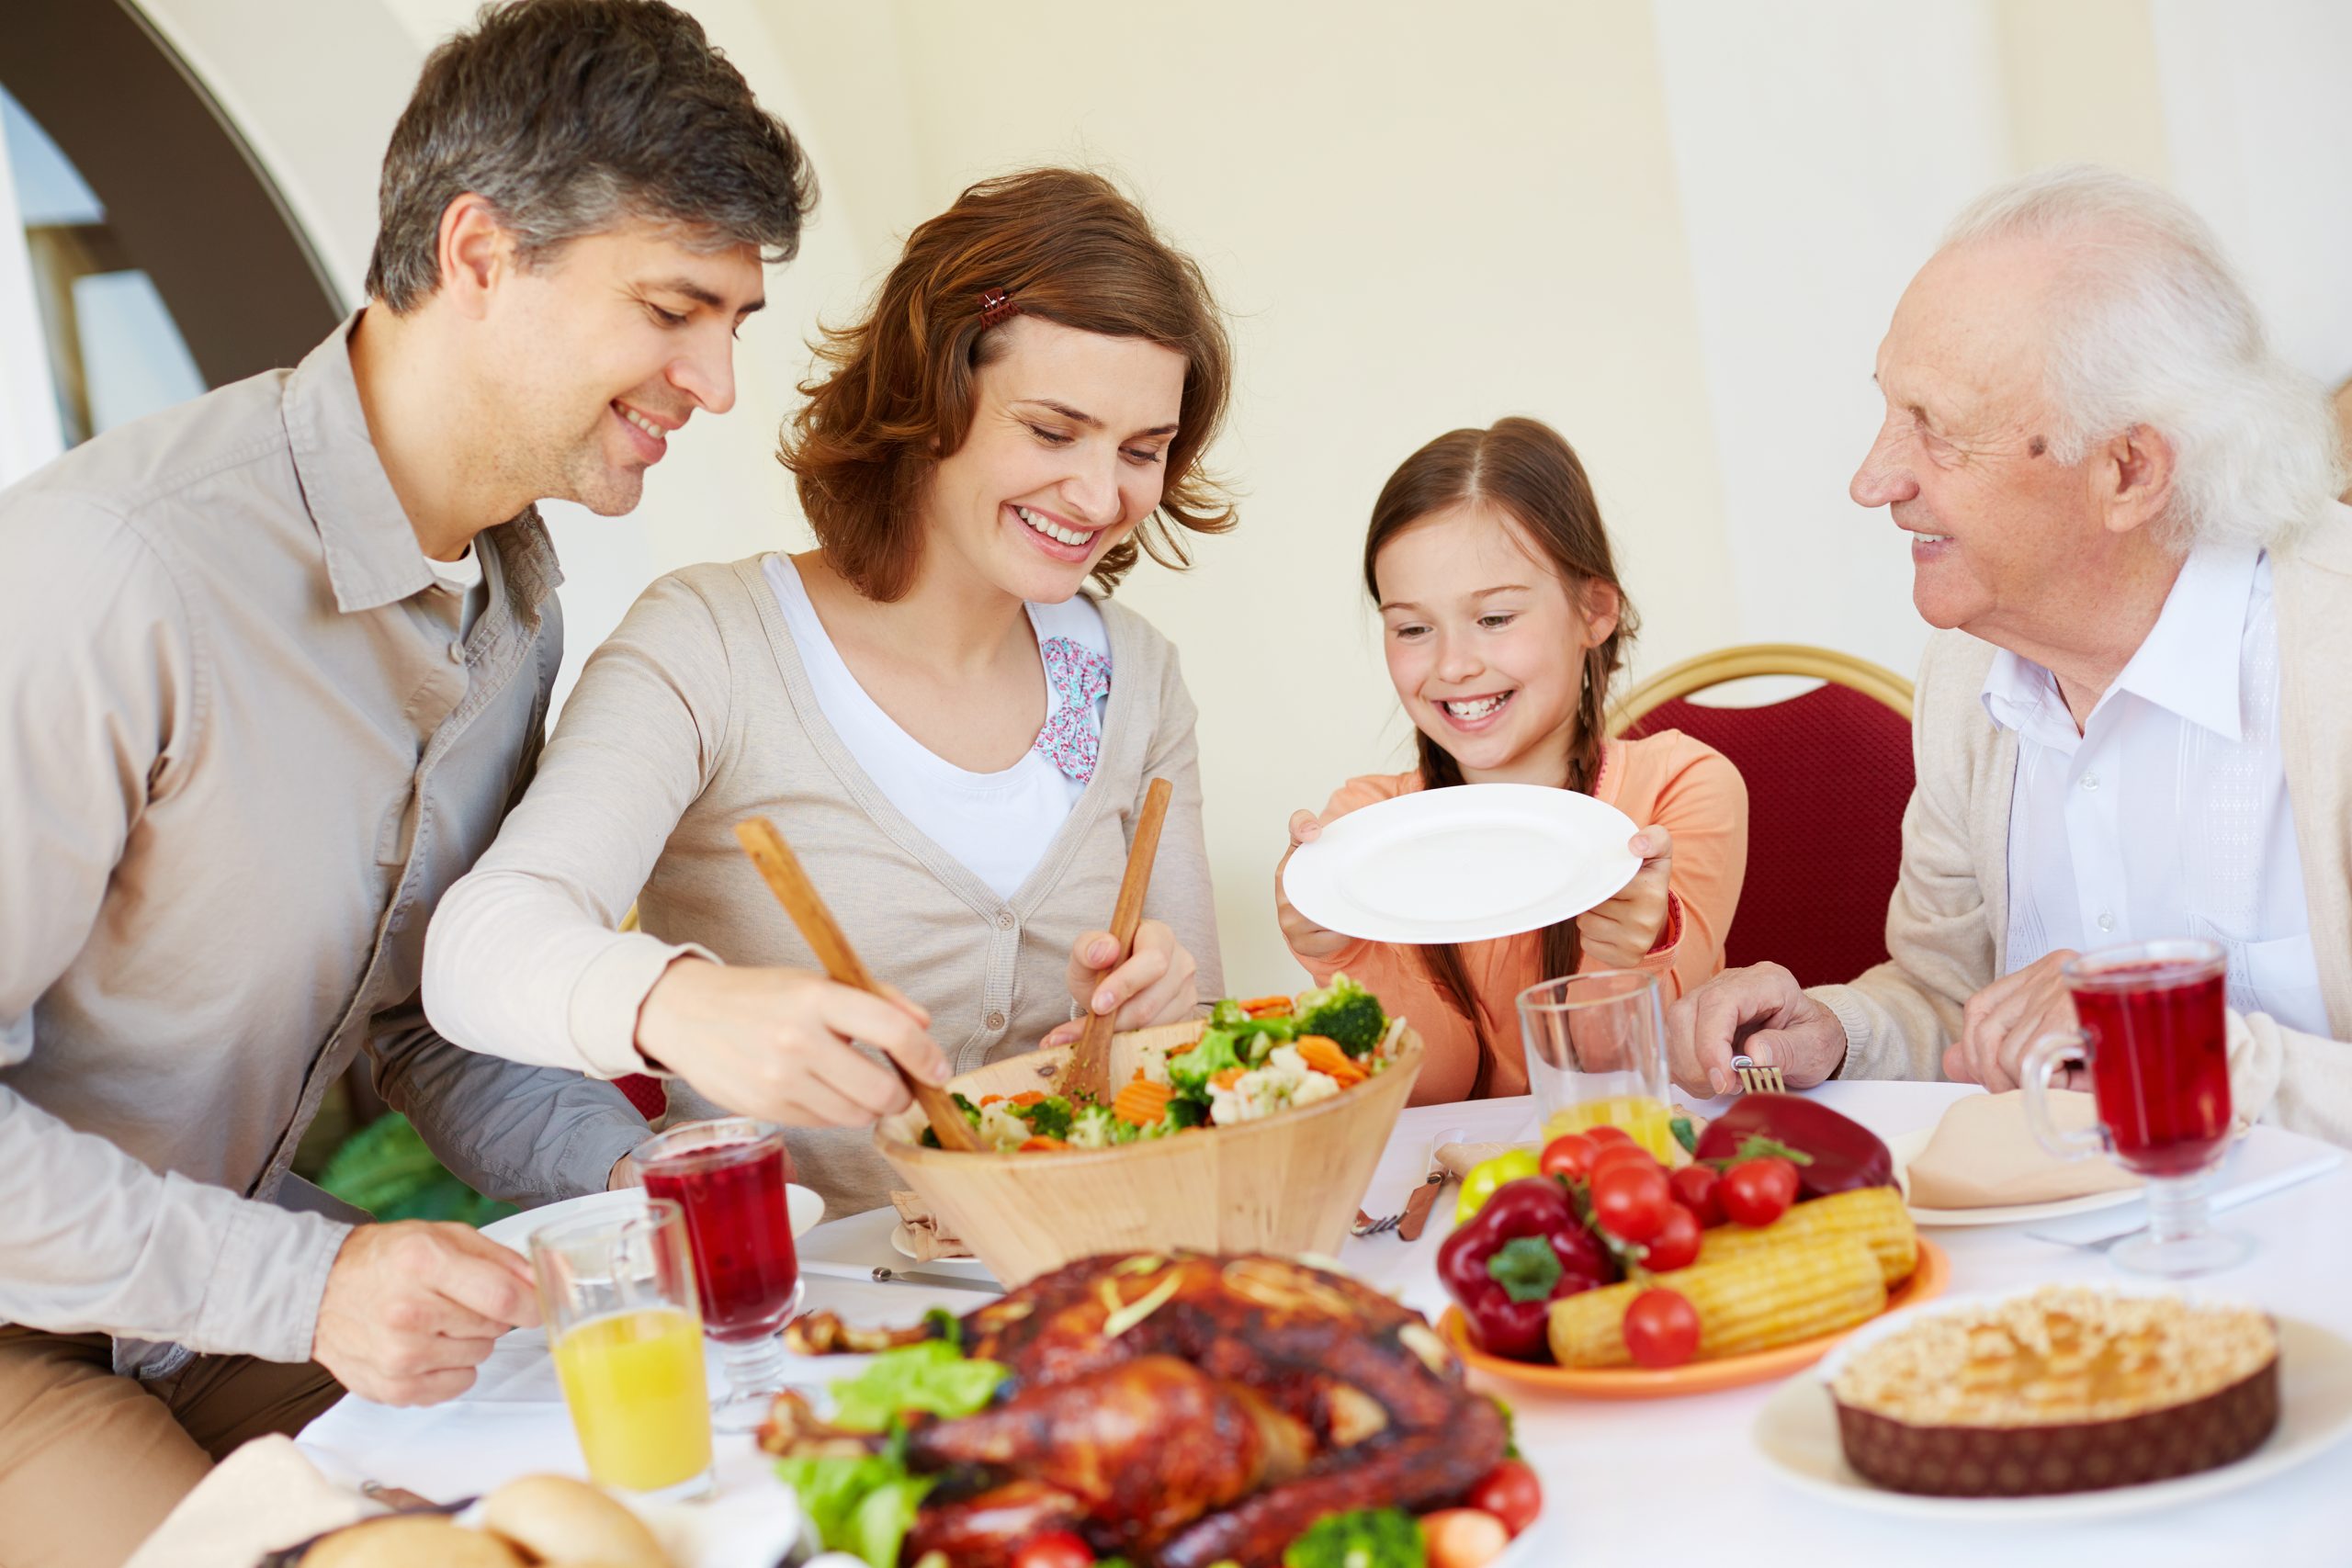 8 Simple Tips to Avoid Insurance Claims While You're on Vacation This Thanksgiving